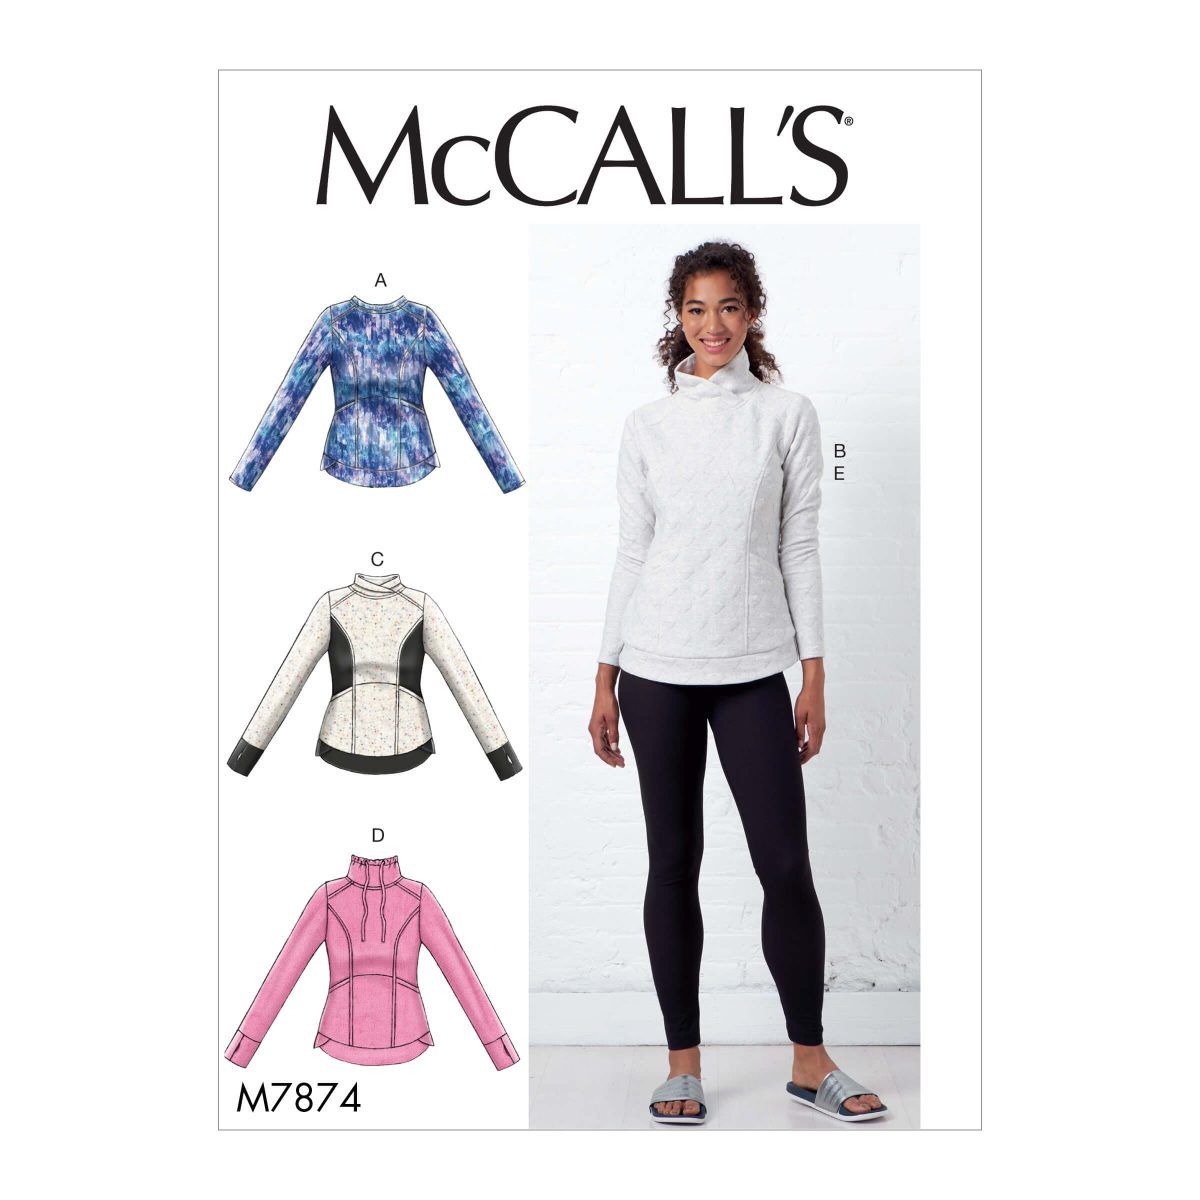 McCall's Sewing Pattern M7874 Misses' Tops and Leggings